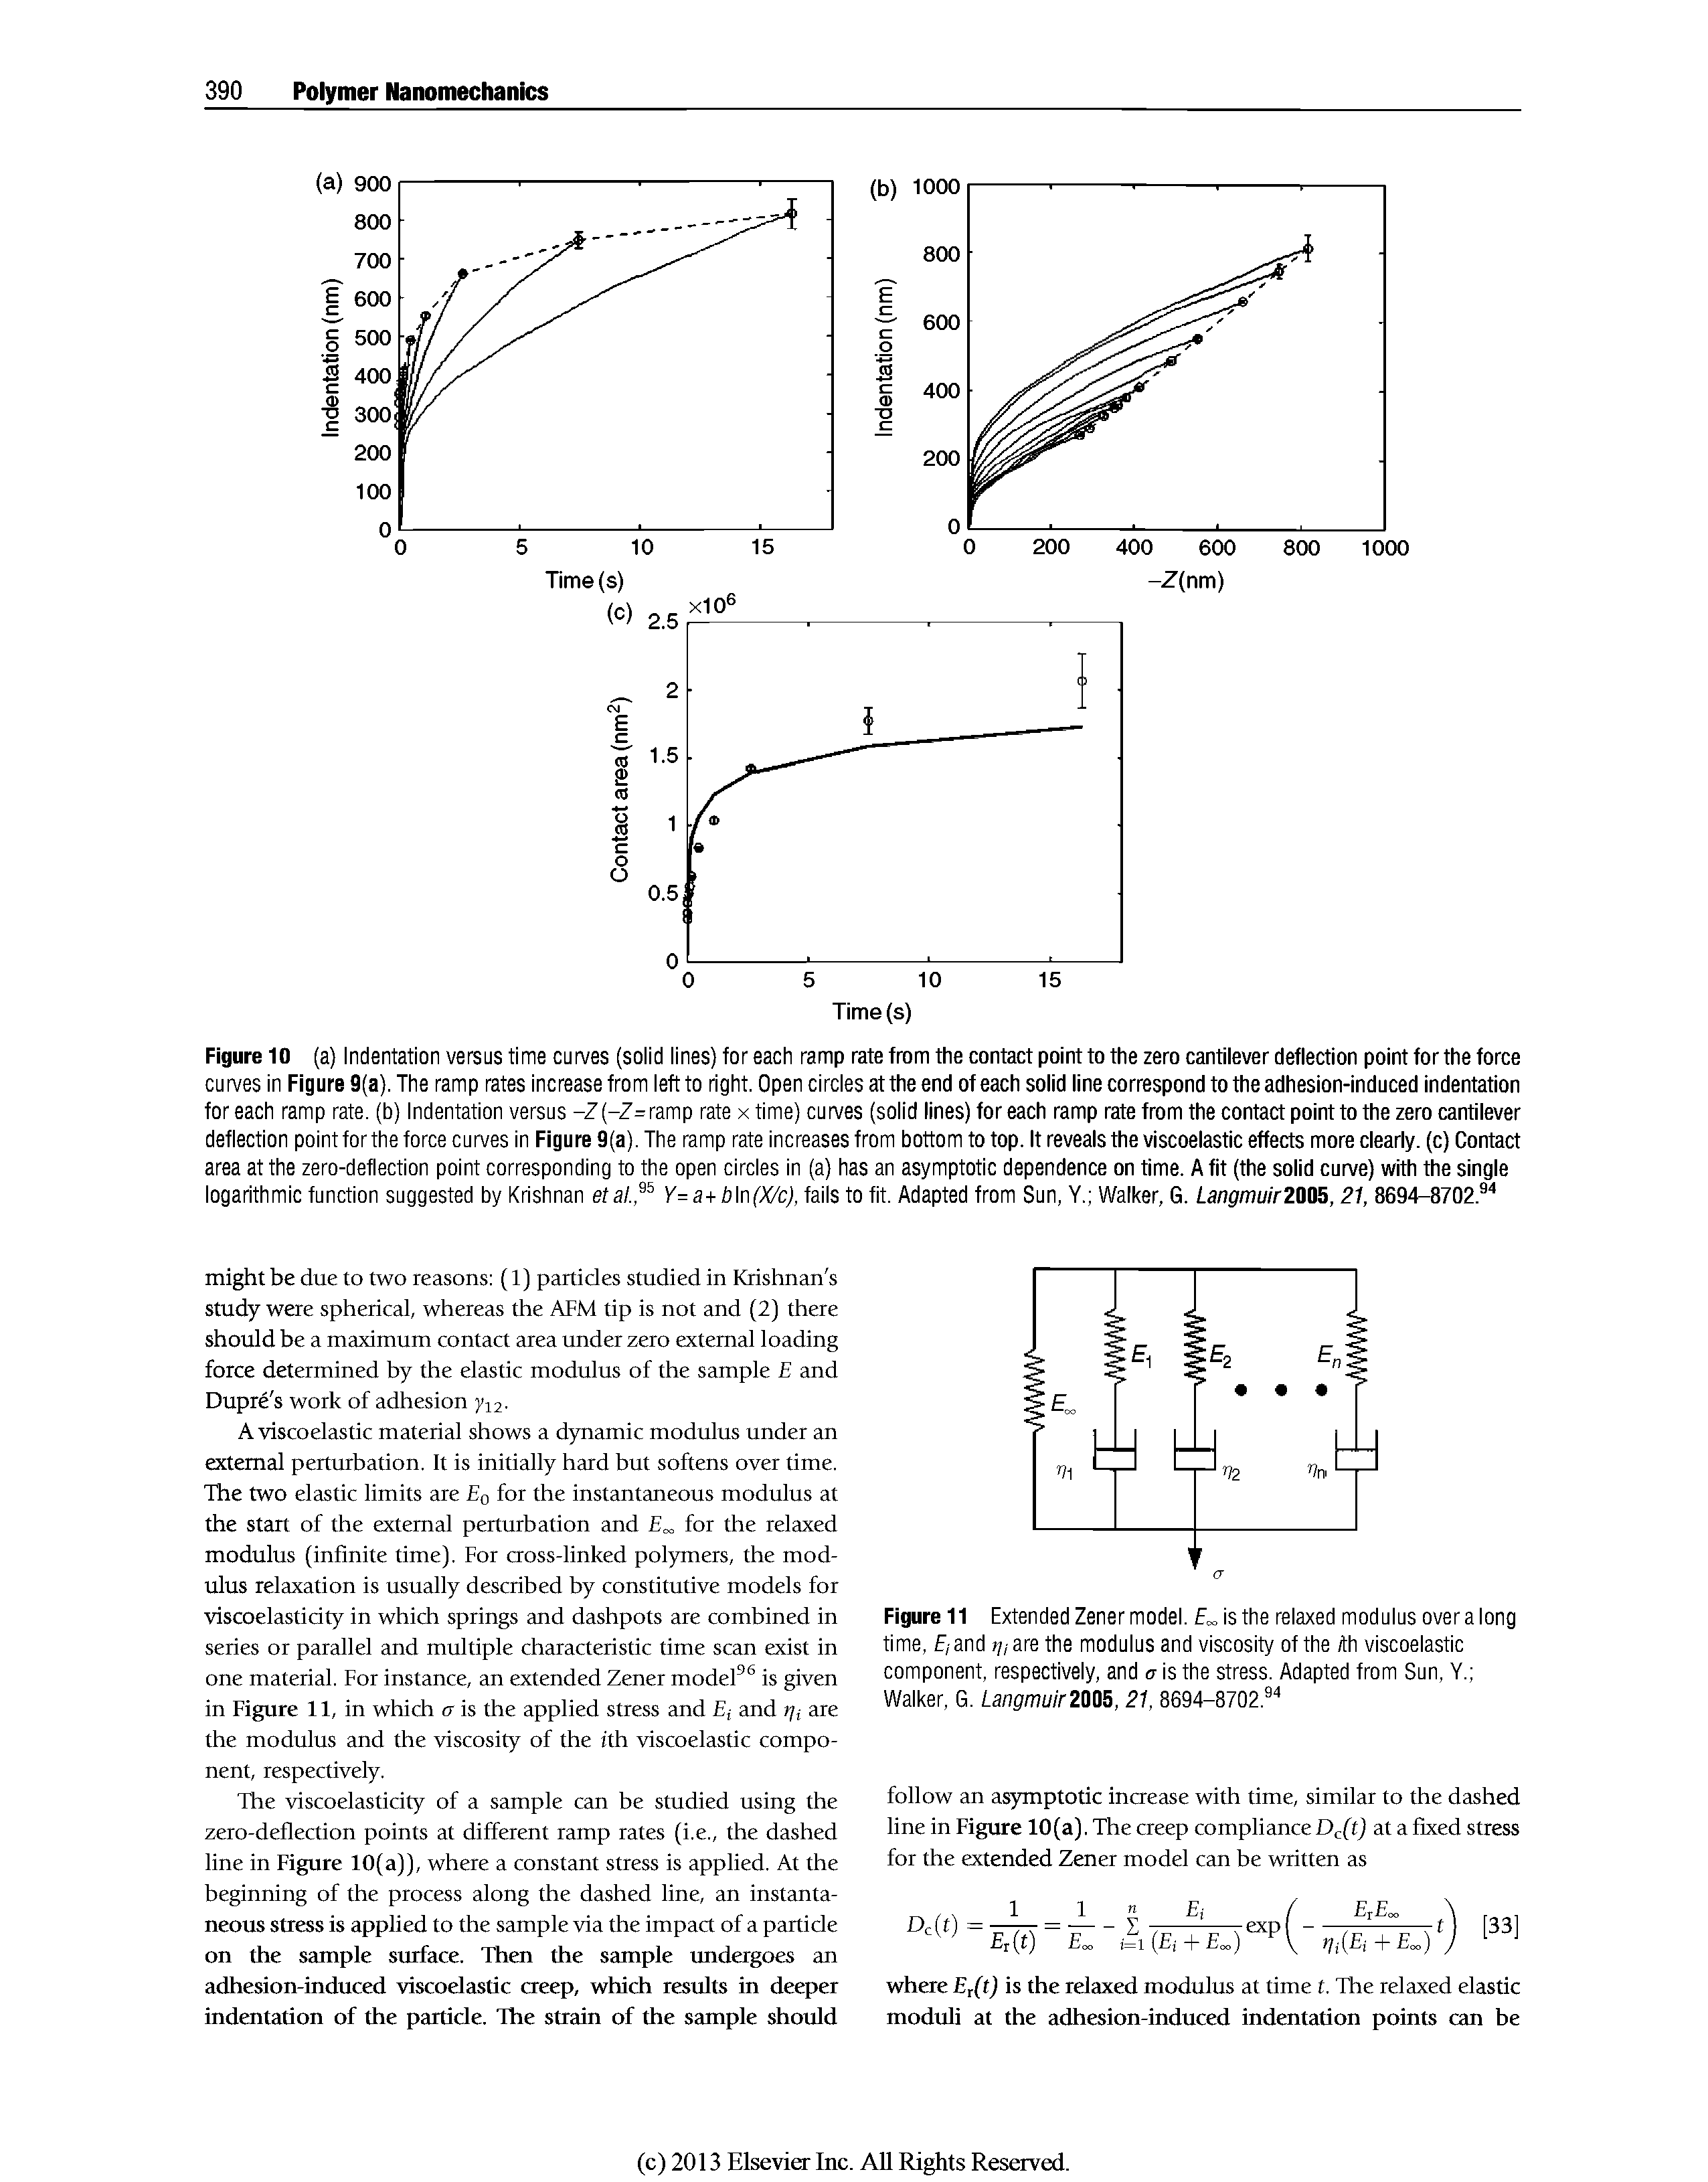 Figure 11 Extended Zener model. is the relaxed modulus over a long time, f, and ti, are the modulus and viscosity of the /th viscoelastic component, respectively, and r is the stress. Adapted from Sun, Y. Walker, G. Langrnuir2m, 21, 8694-8702. ...